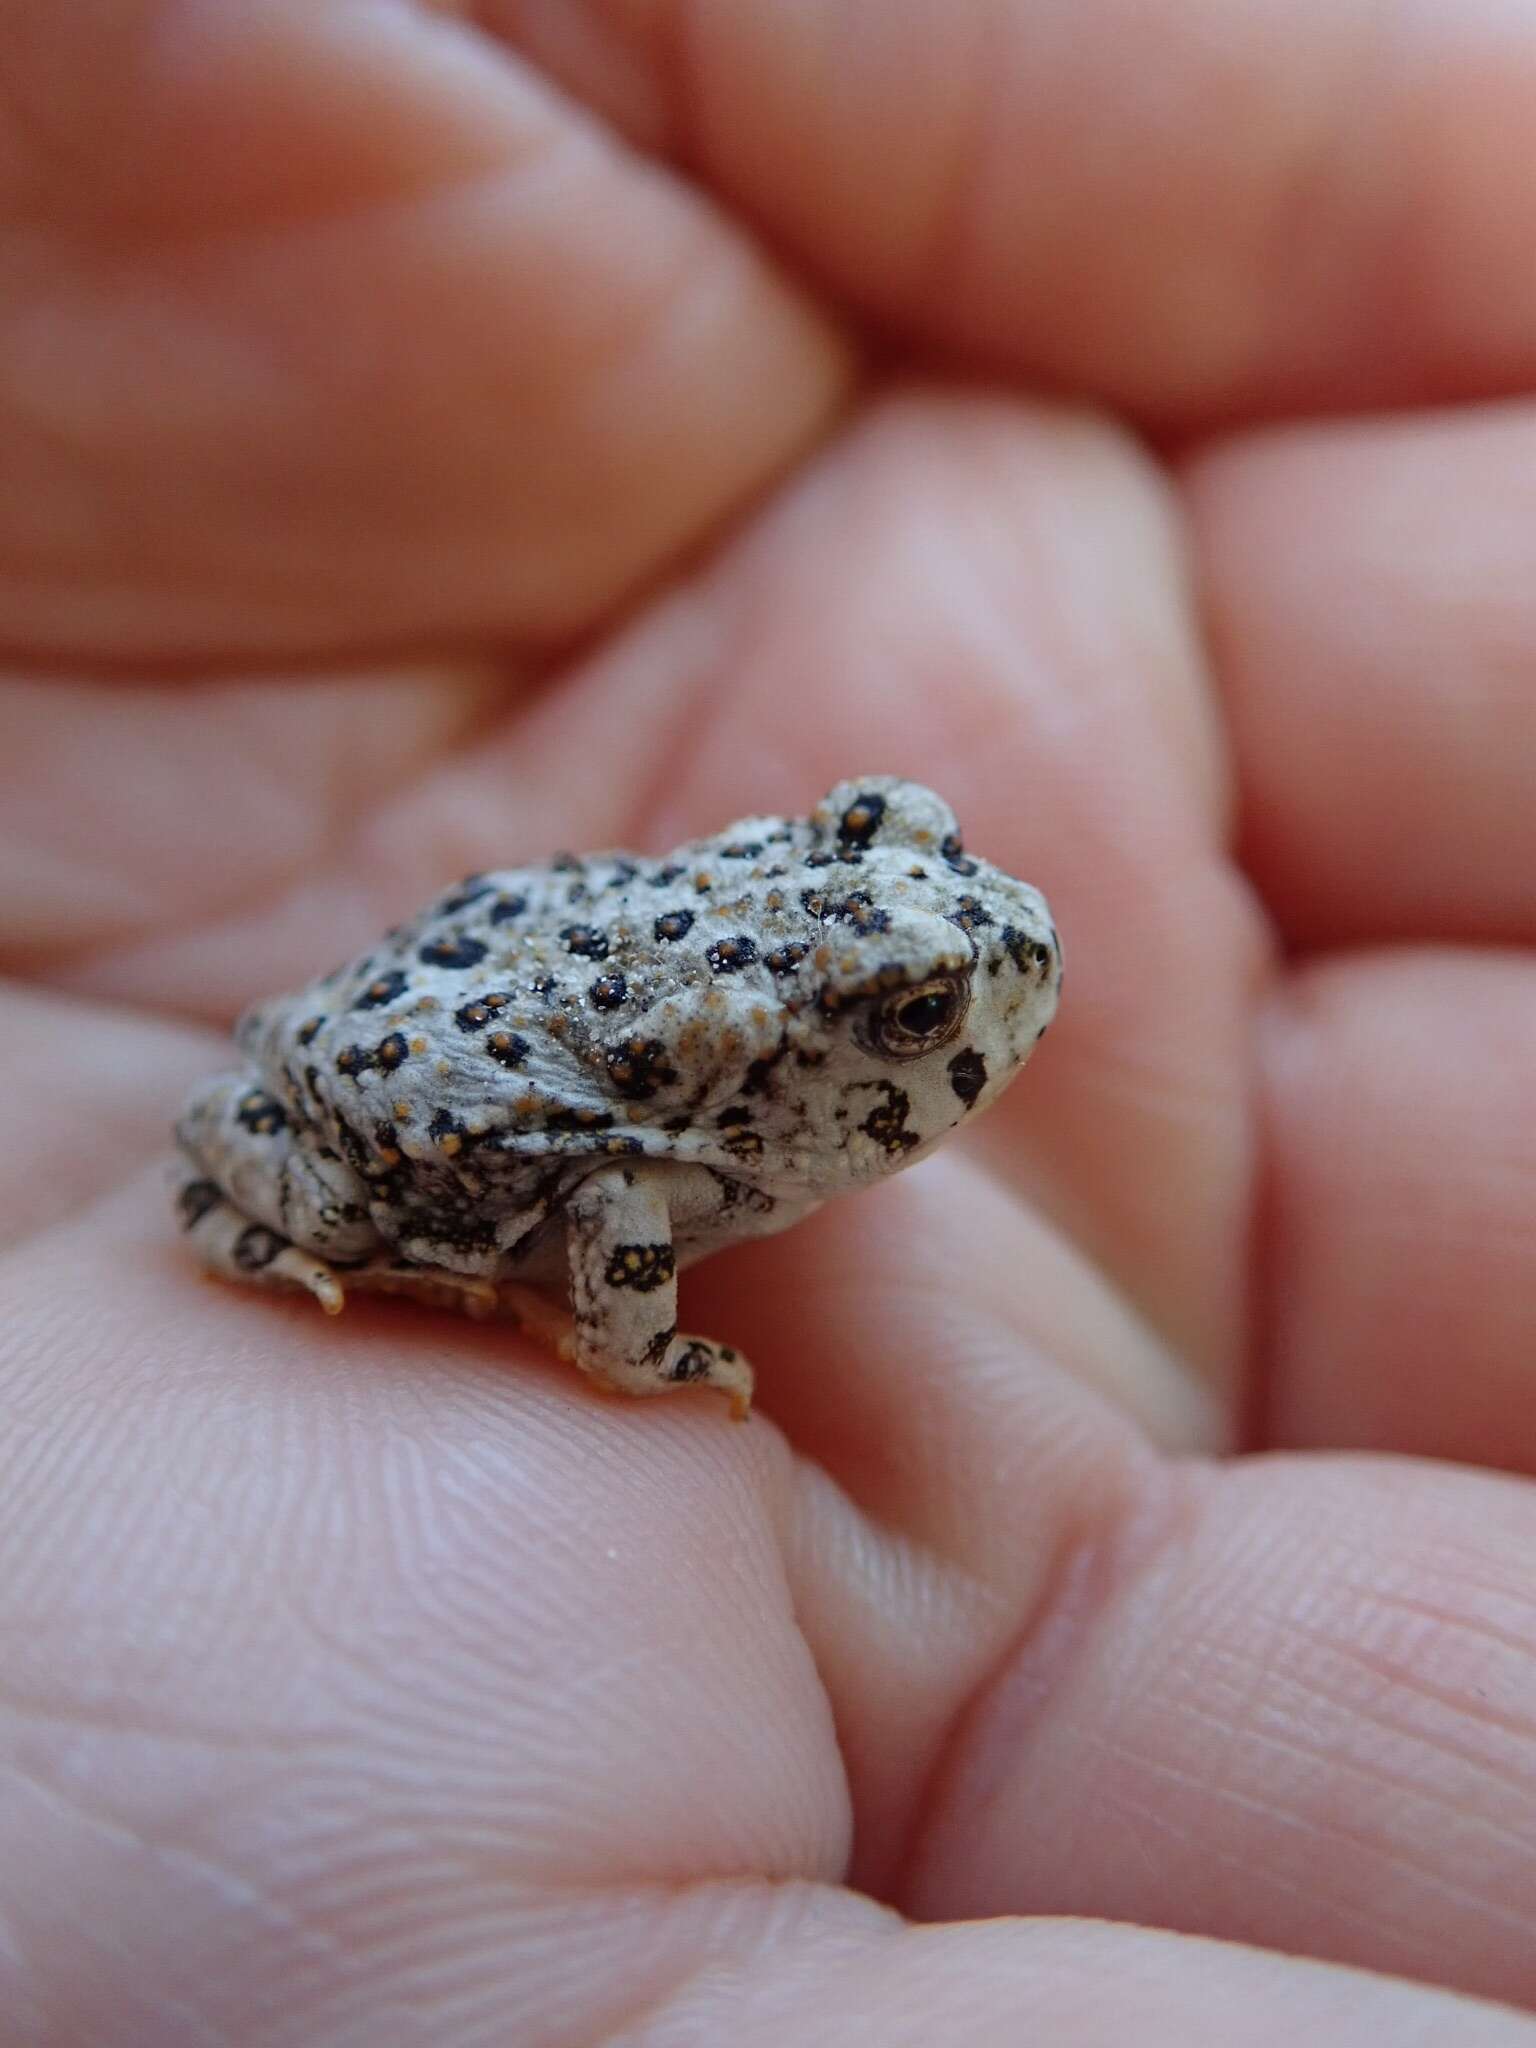 Image of Arroyo toad